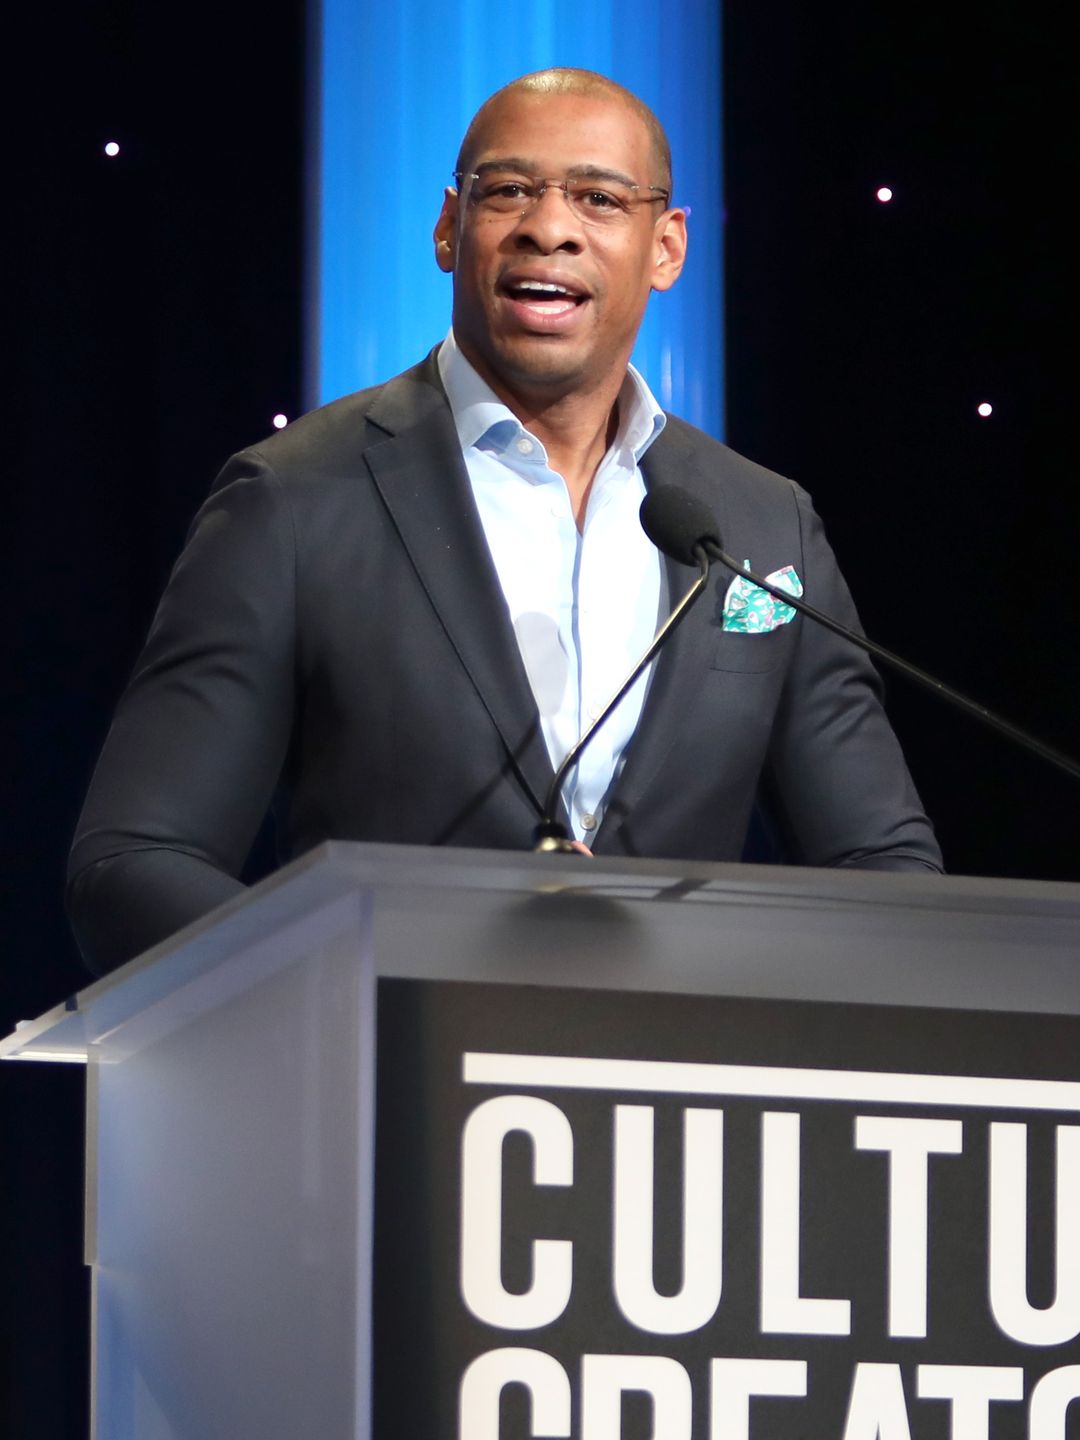 DeMarco Morgan on stage speaking at an event